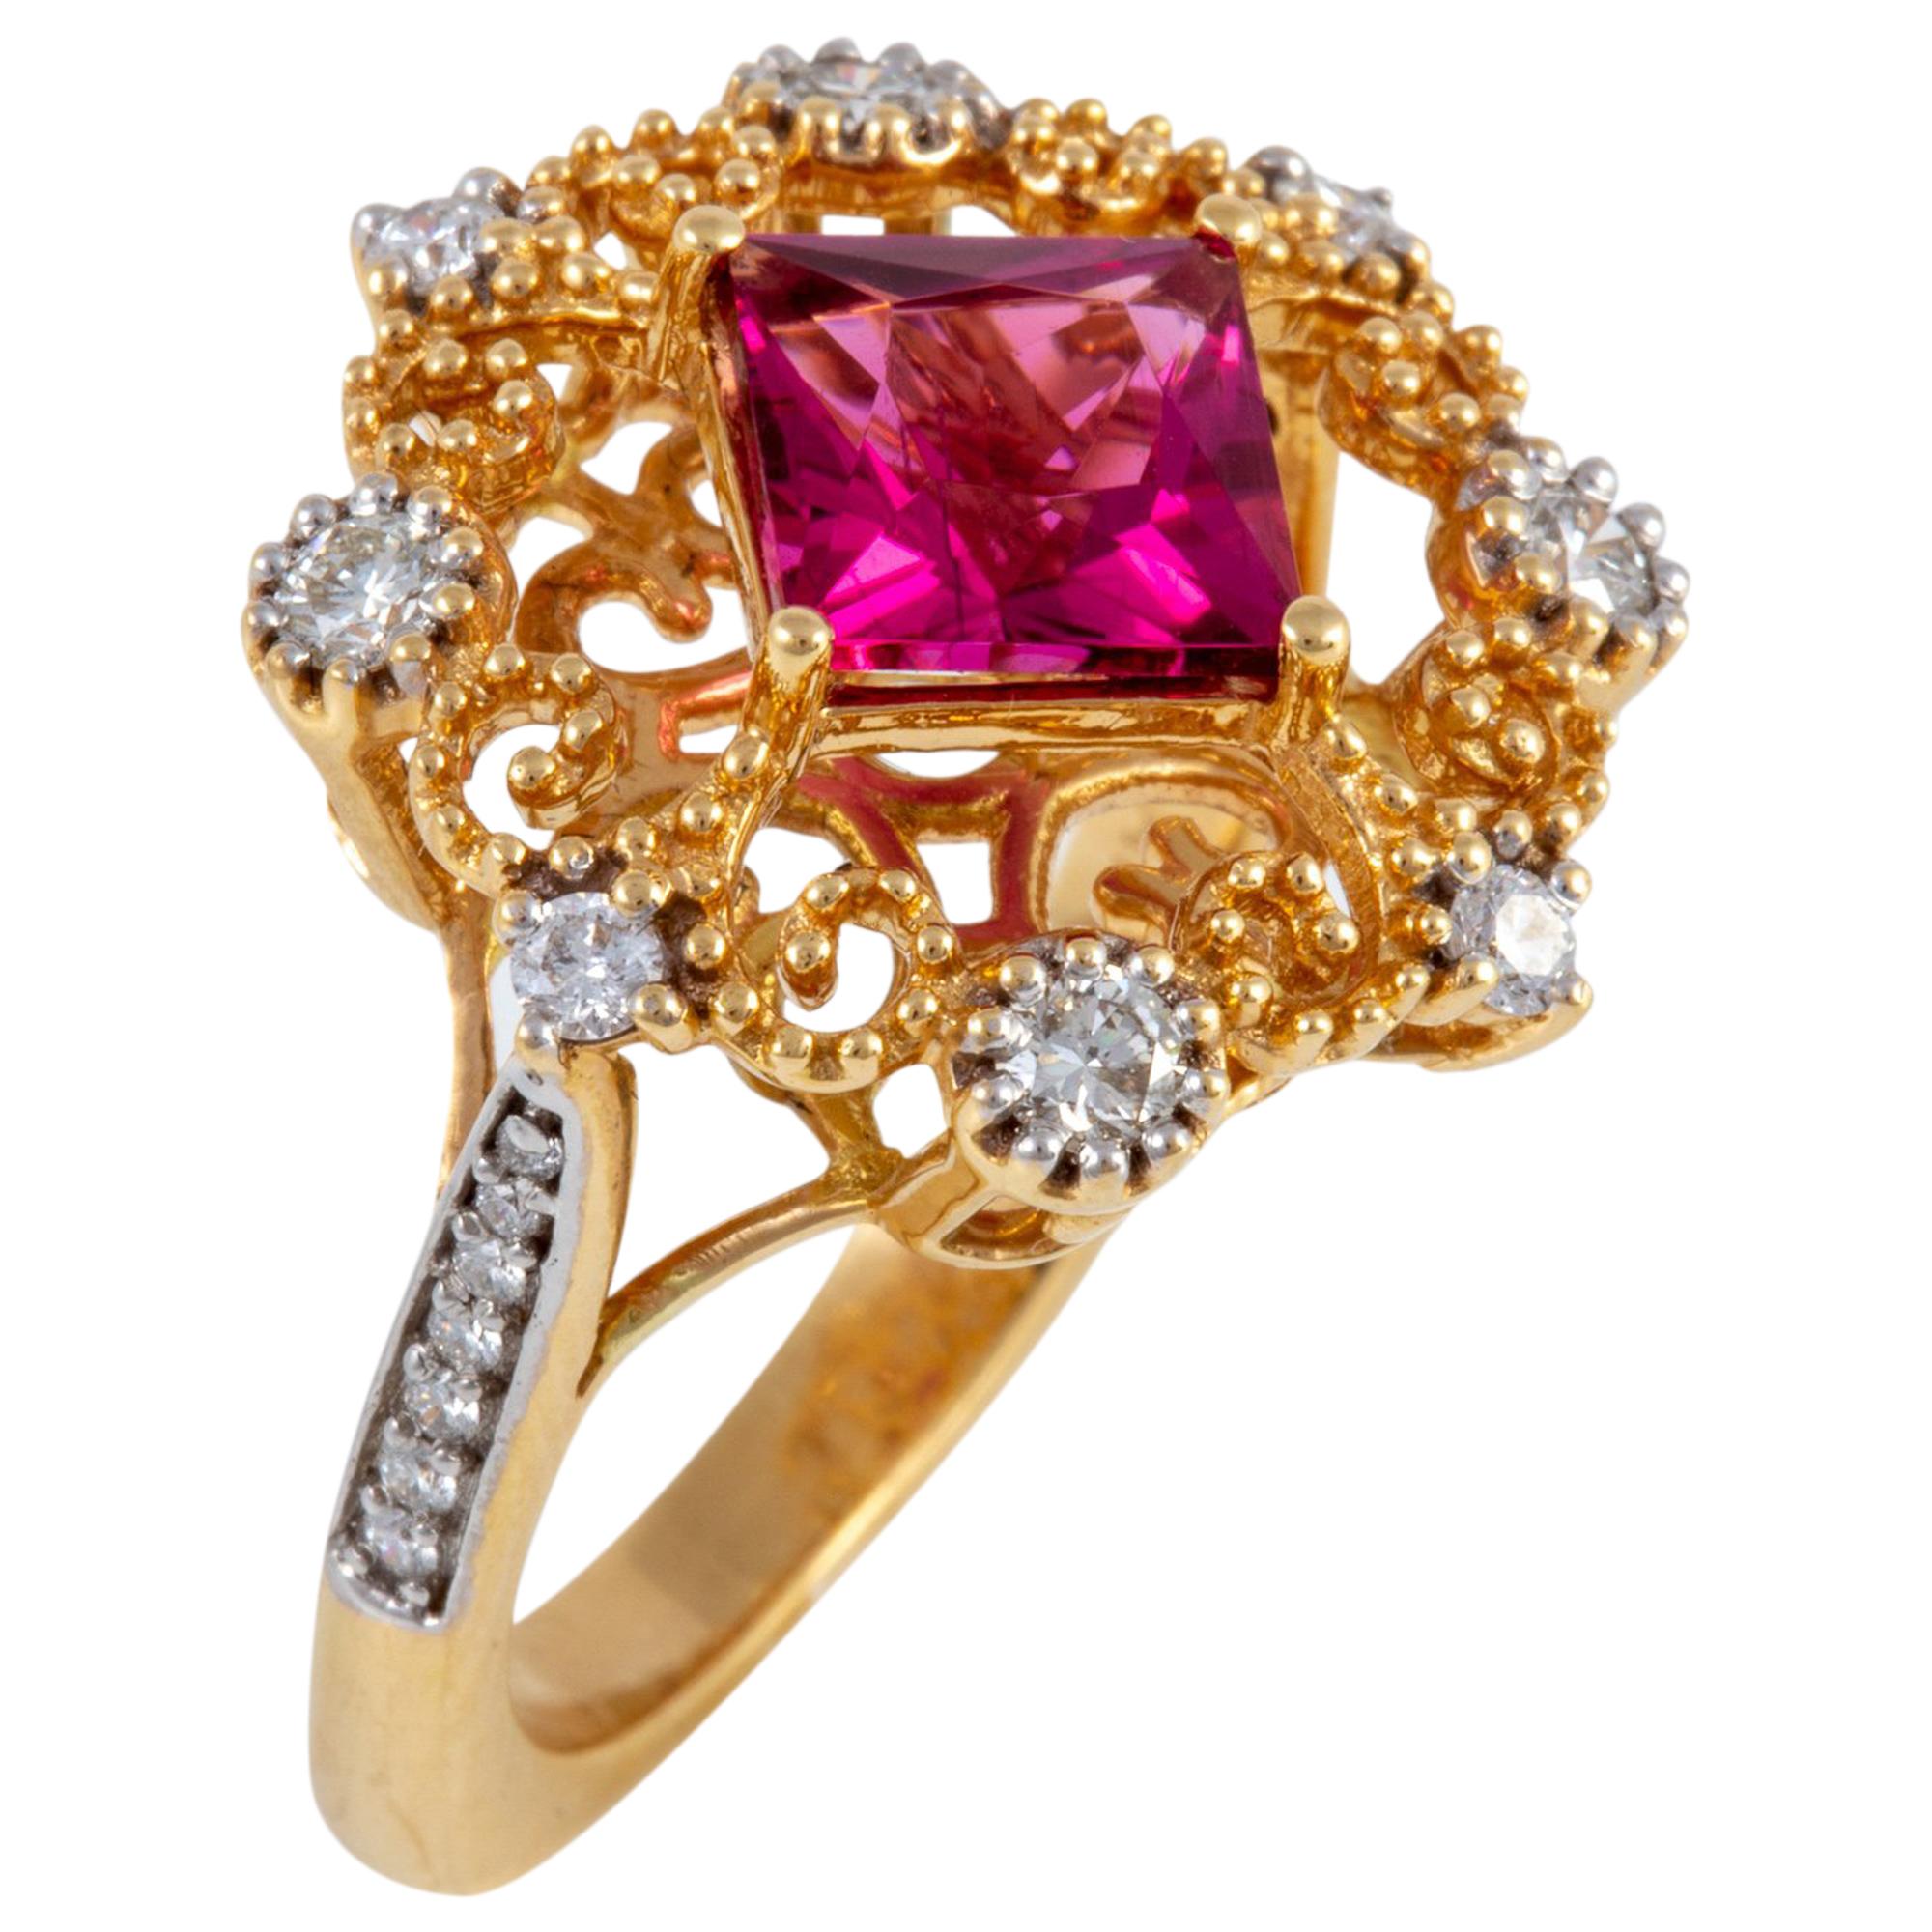 Rubellite Tourmaline and Diamond Ring set in 18 kt Gold